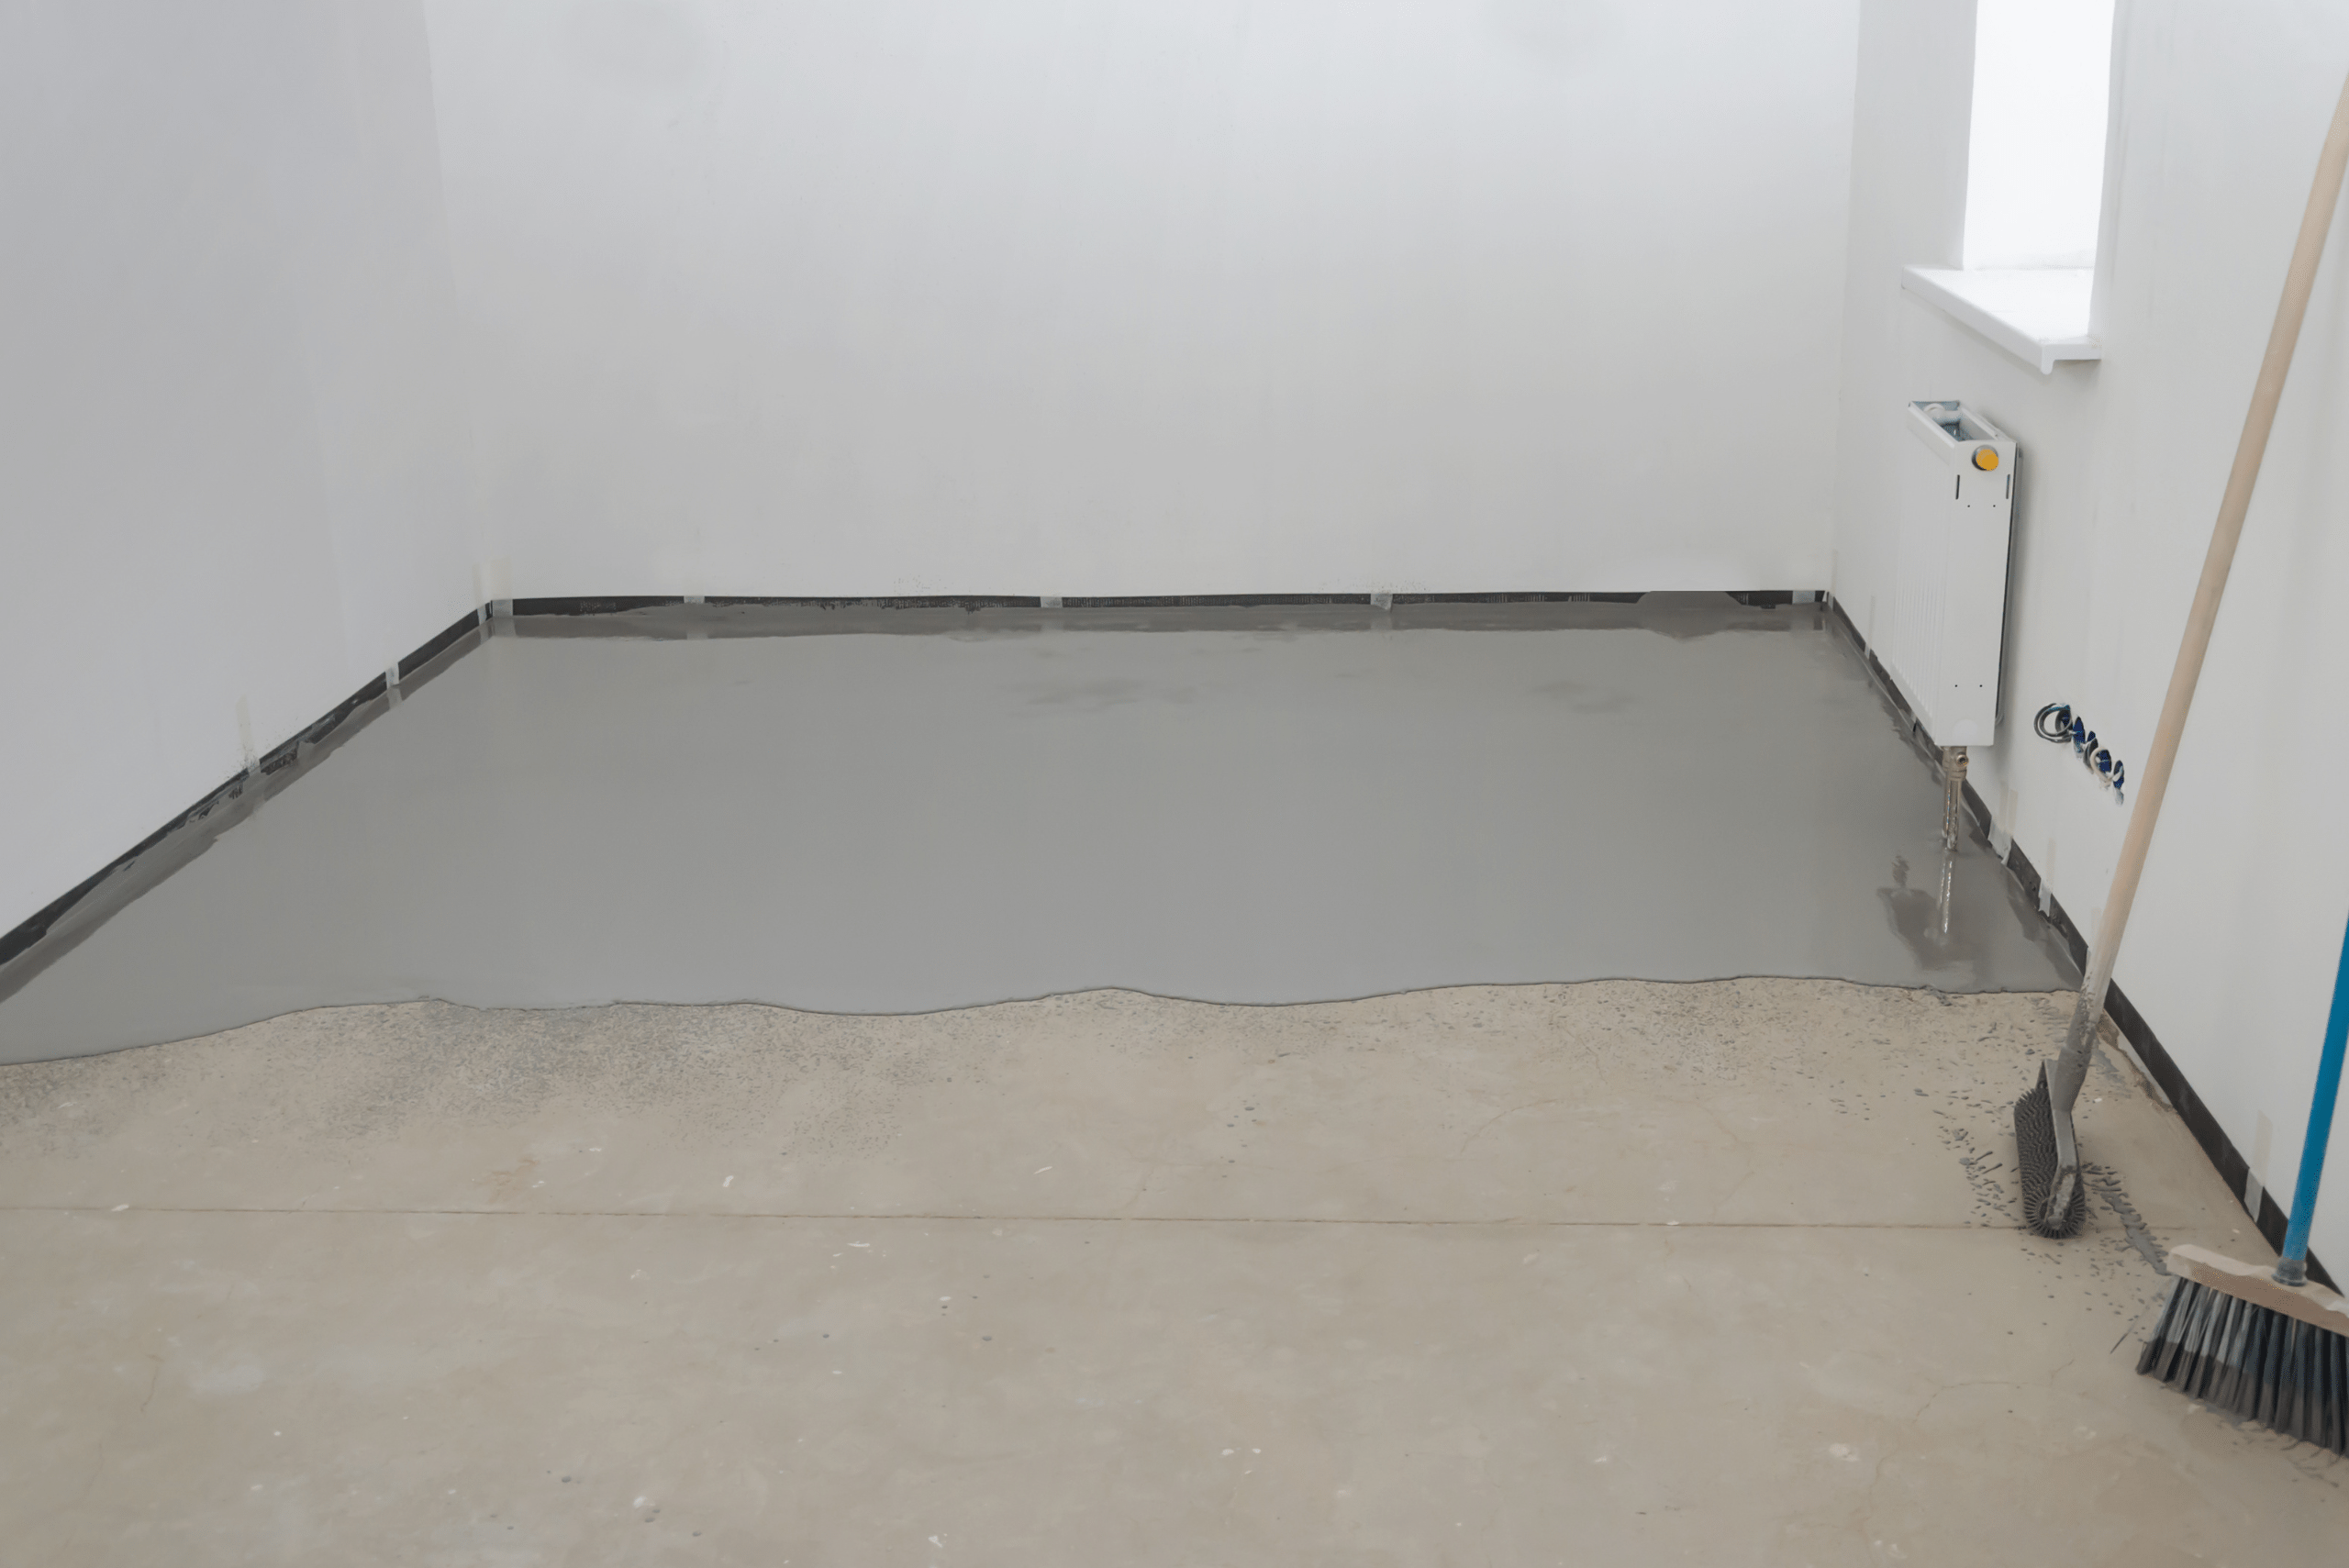 A room with self-leveling concrete poured out.